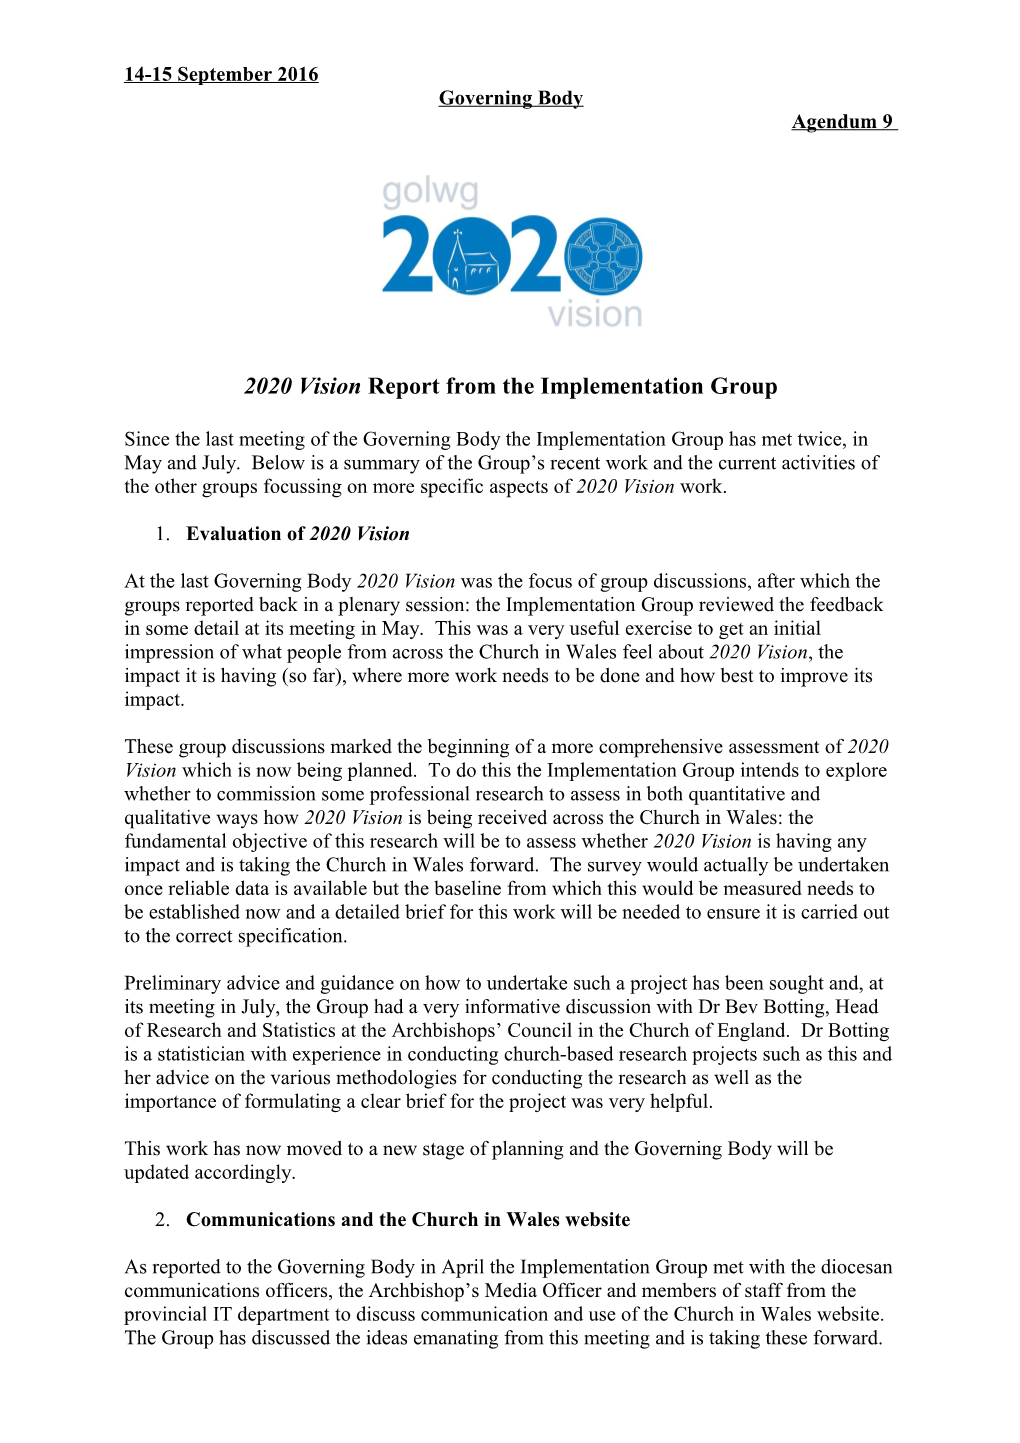 2020 Vision Report from the Implementation Group